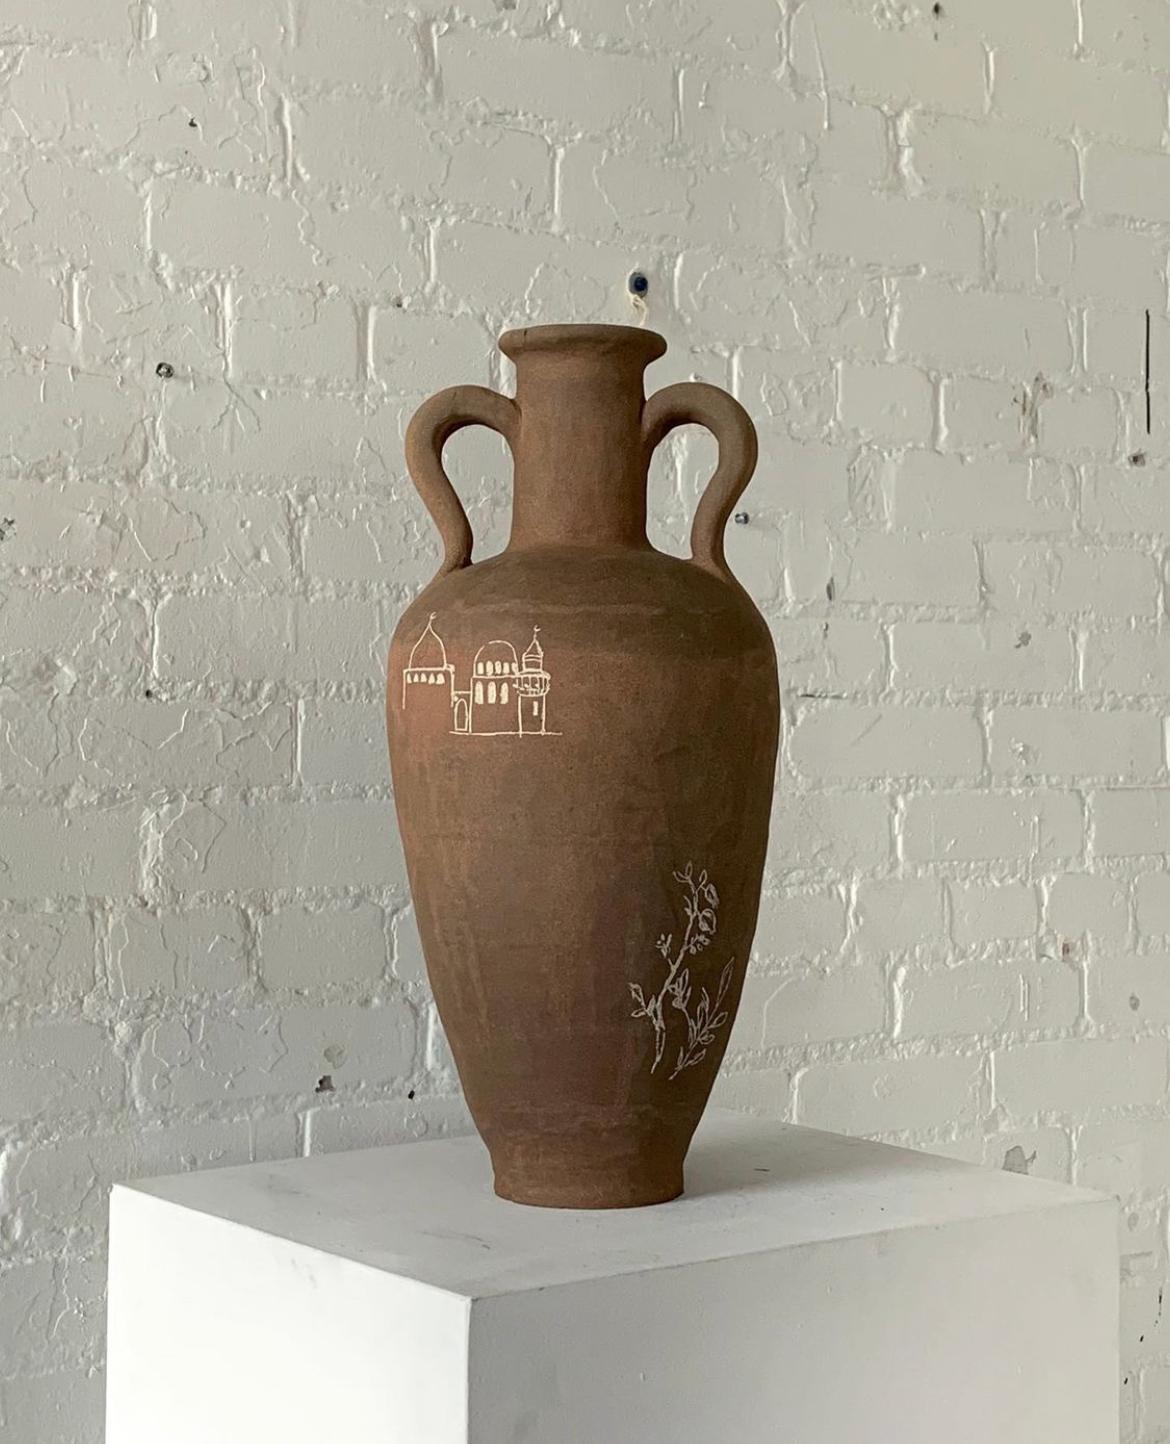 Levant vase by Solem Ceramics
Dimensions: Ø 25.5 x H 48.5 cm.
Materials: Red stoneware, White underglaze, glaze
This vase is water safe.

Solem’s work pulls from memories of the architecture and community within SWANA and Southeast Asia